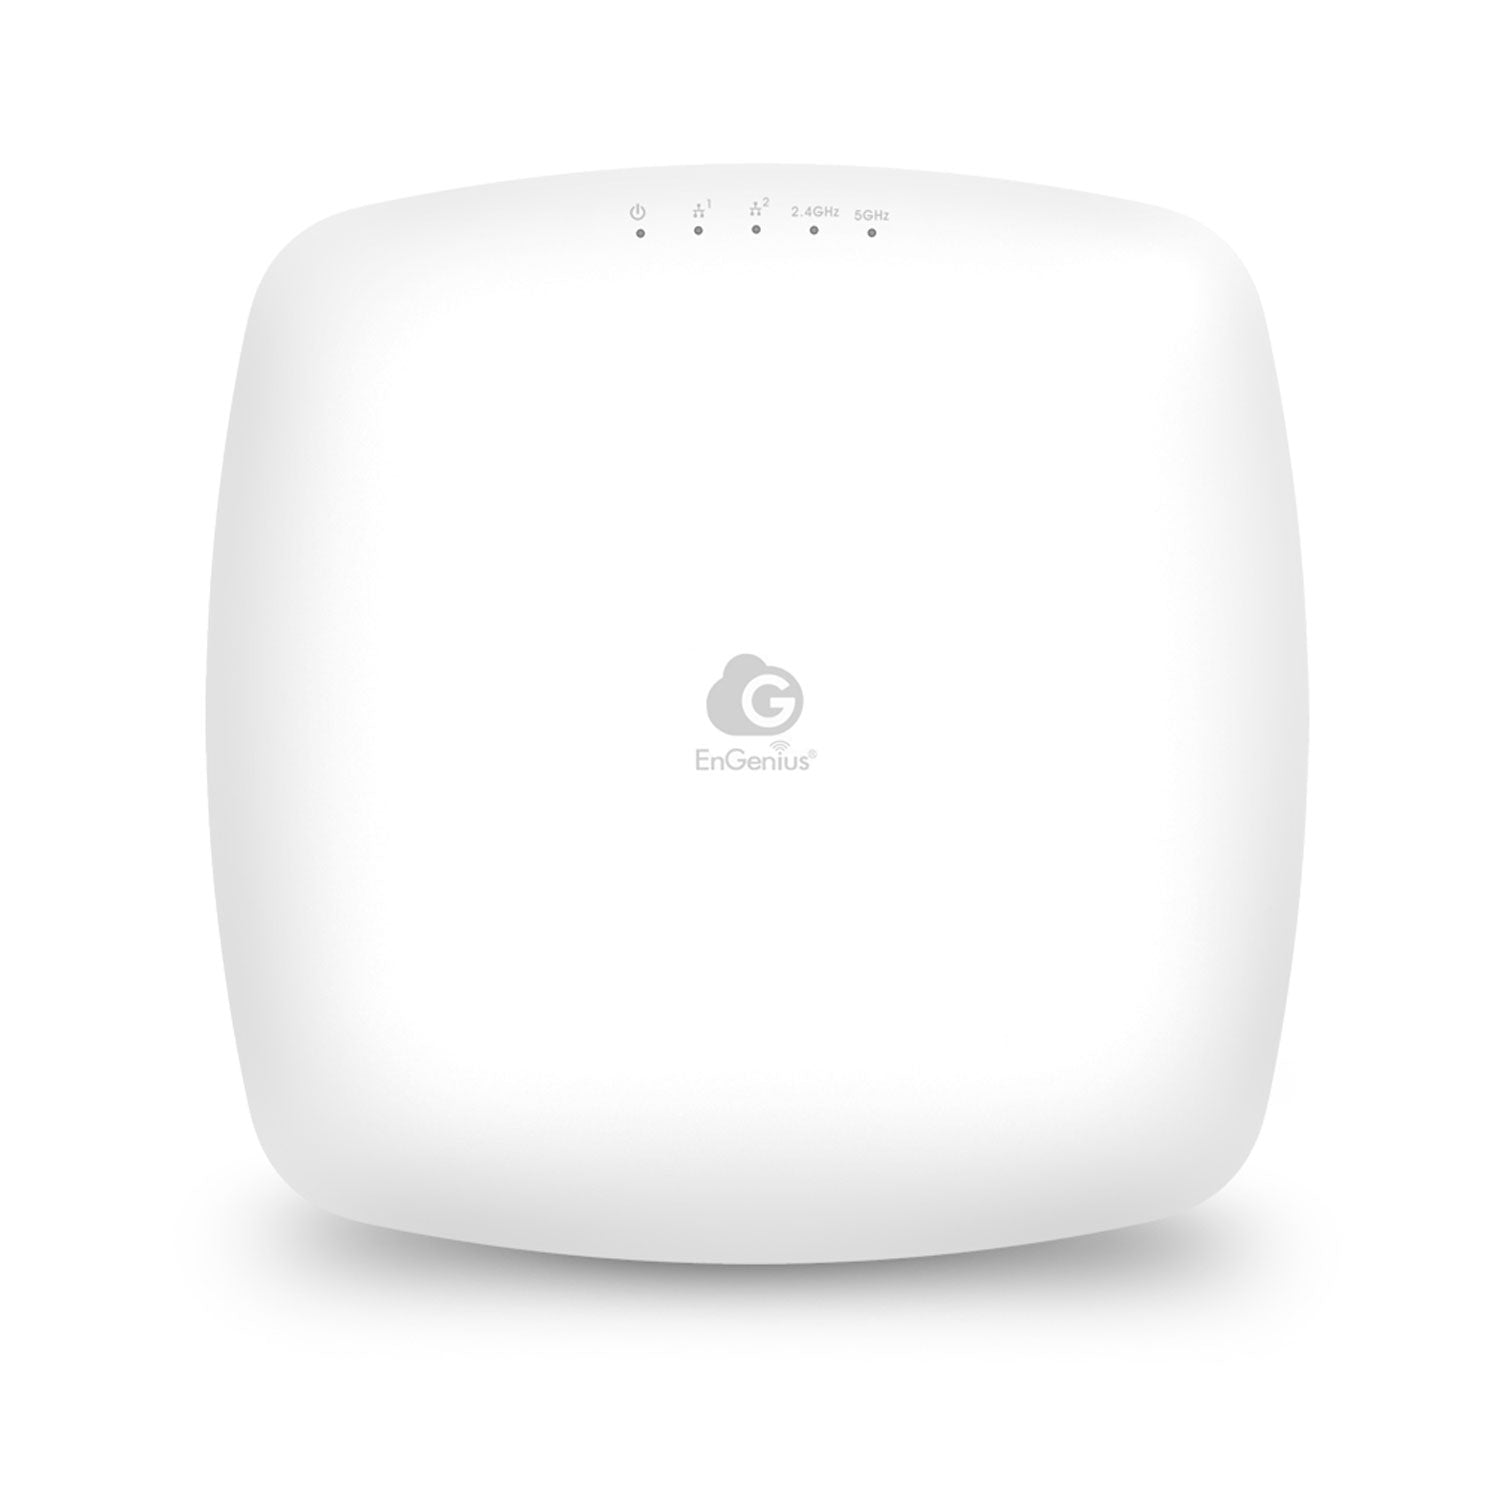 ECW130: Cloud Managed WiFi 5 11ac Wave 2 4×4 Indoor Access Point